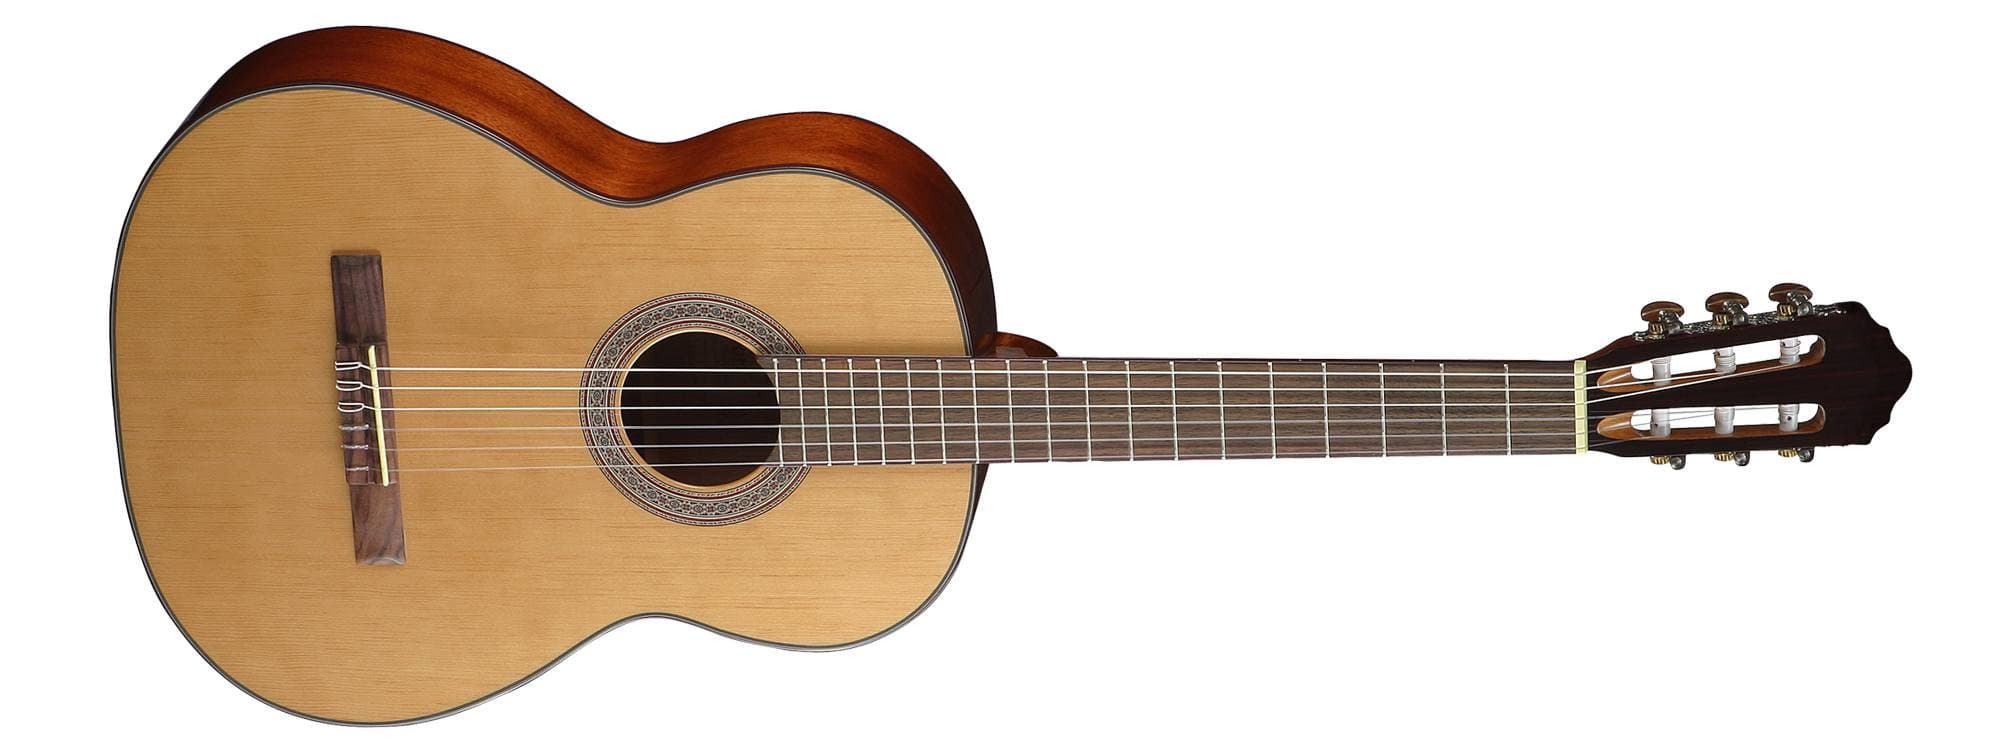 Cort Classical AC200 Natural, Acoustic Guitar for sale at Richards Guitars.